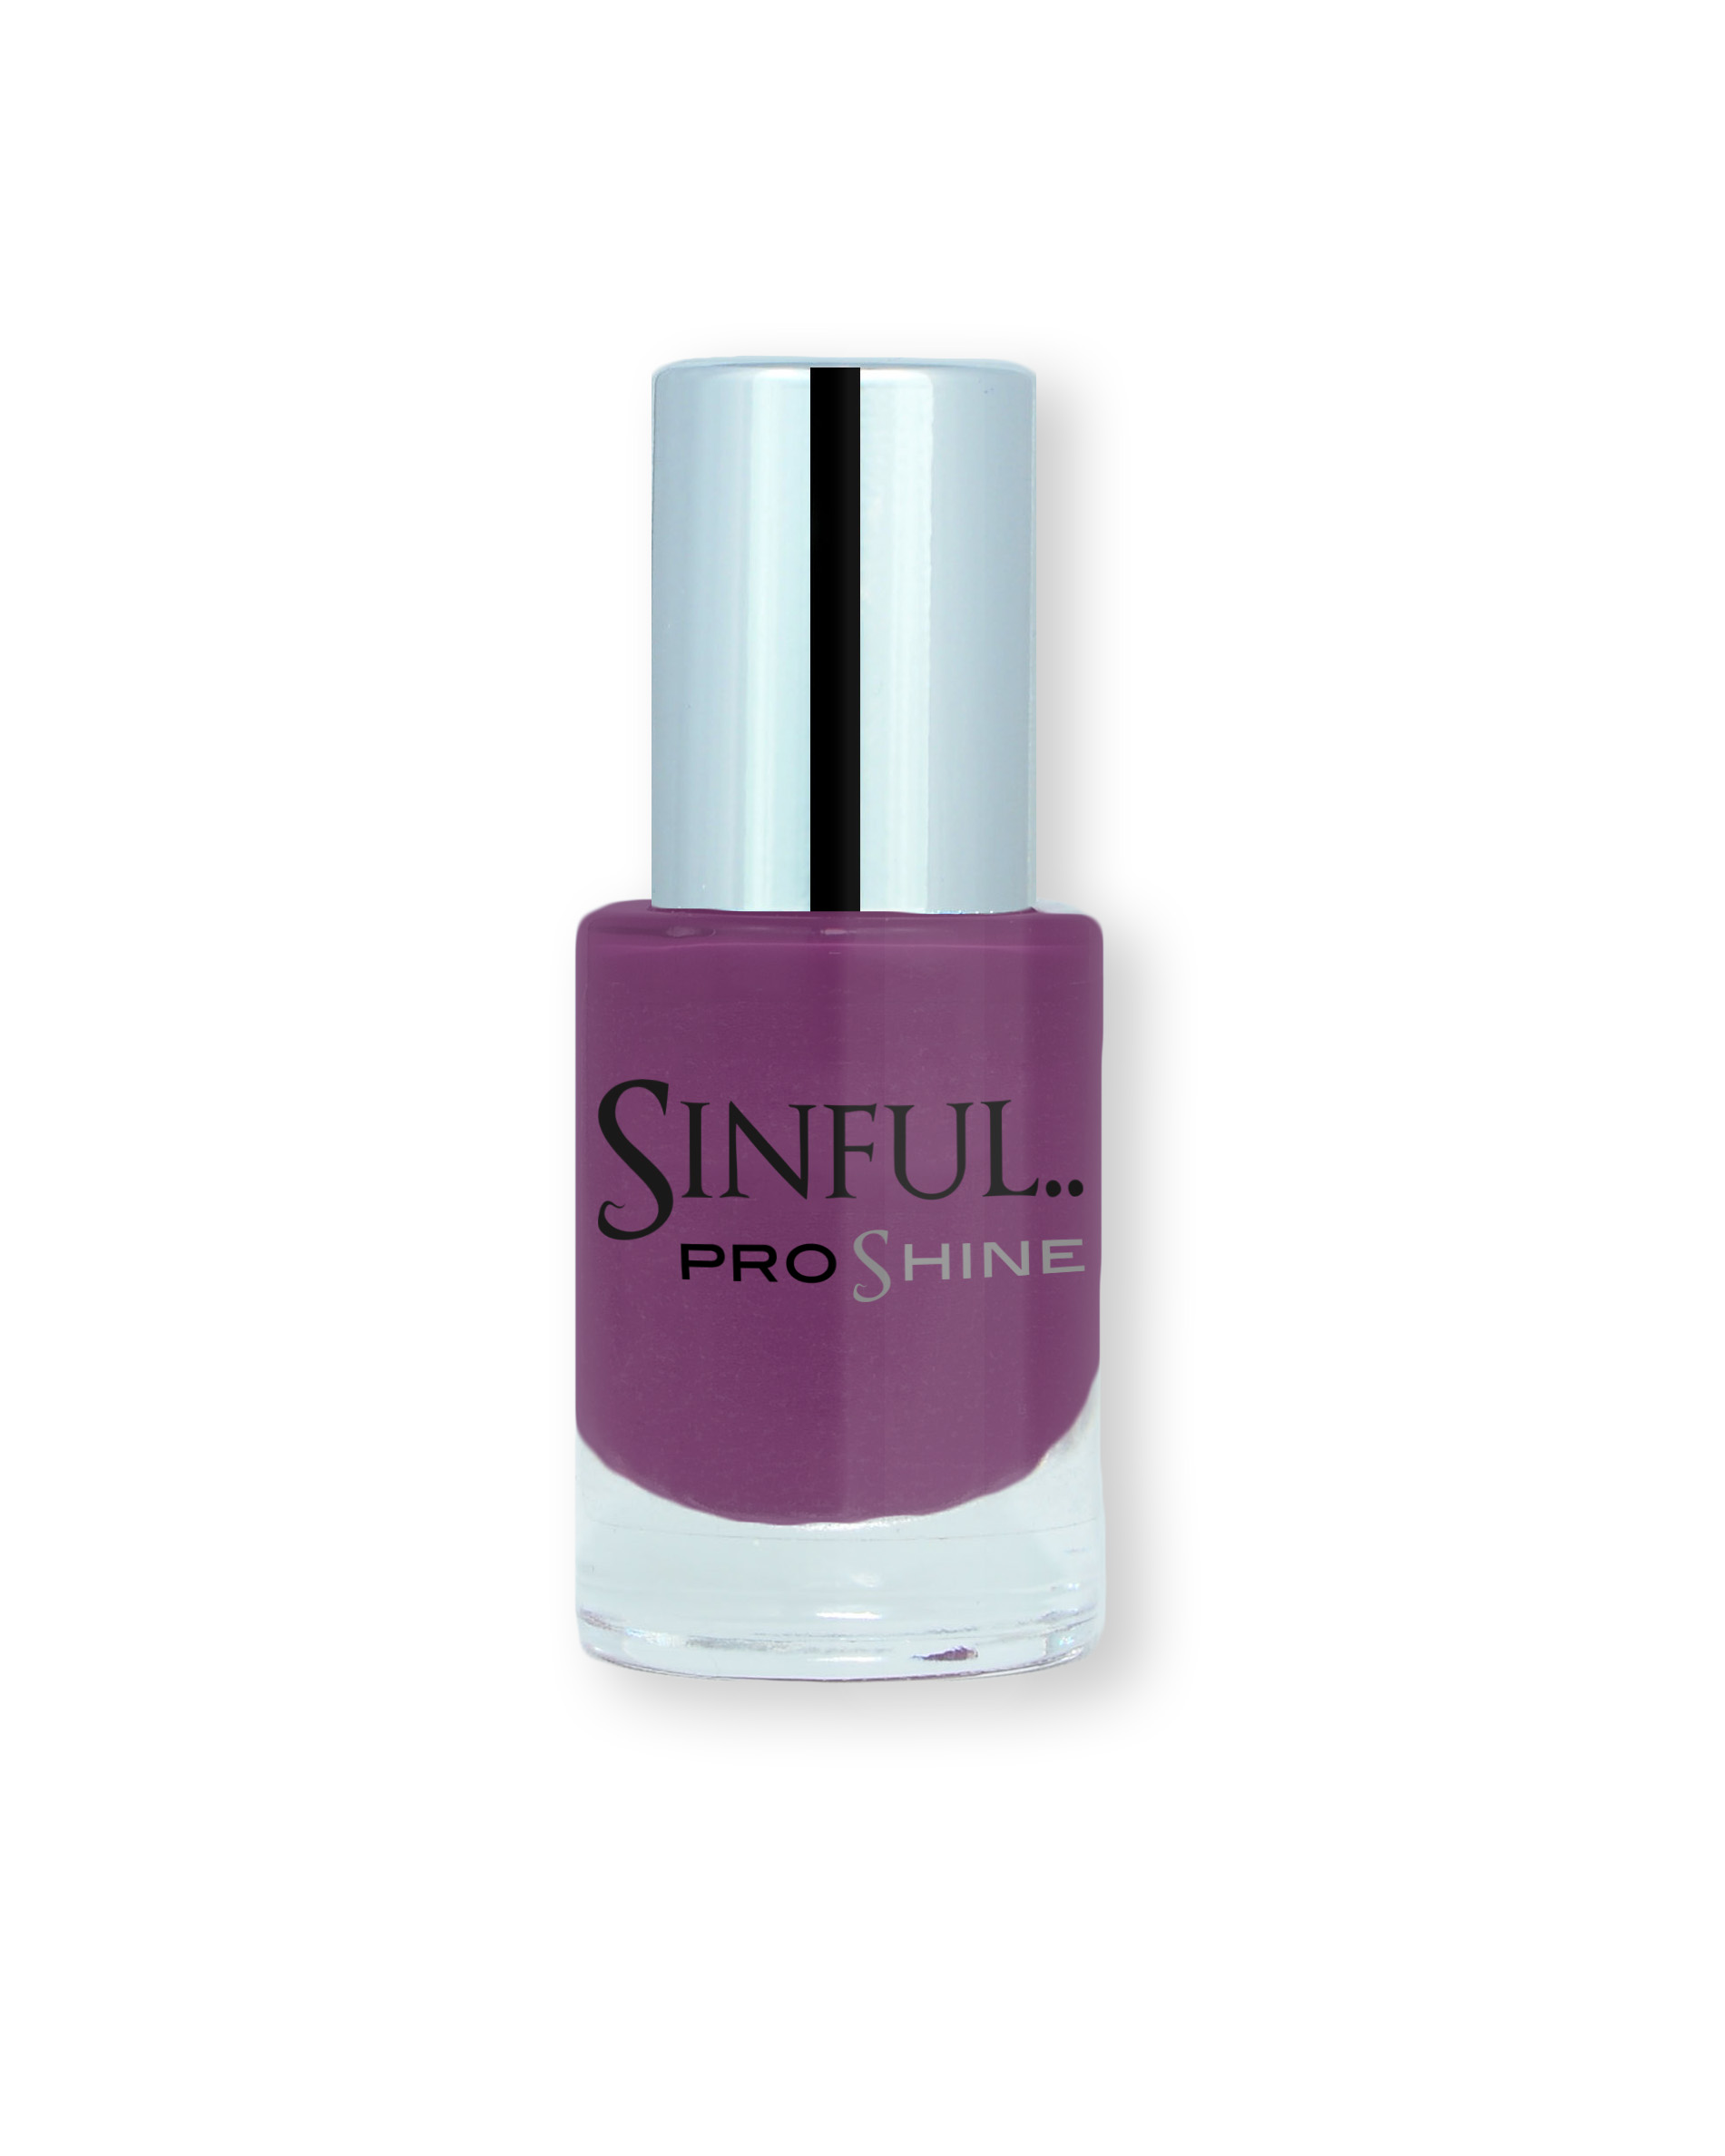 Sinful PROshine is a revolution into top spec imitation gel-like formula, easy application, full coverage and a sleek finish. Spoil yourself with the choice of 42 shades, expertly formulated with the finest grade of pigments. Foul Play: Vibrant berry with a creme finish